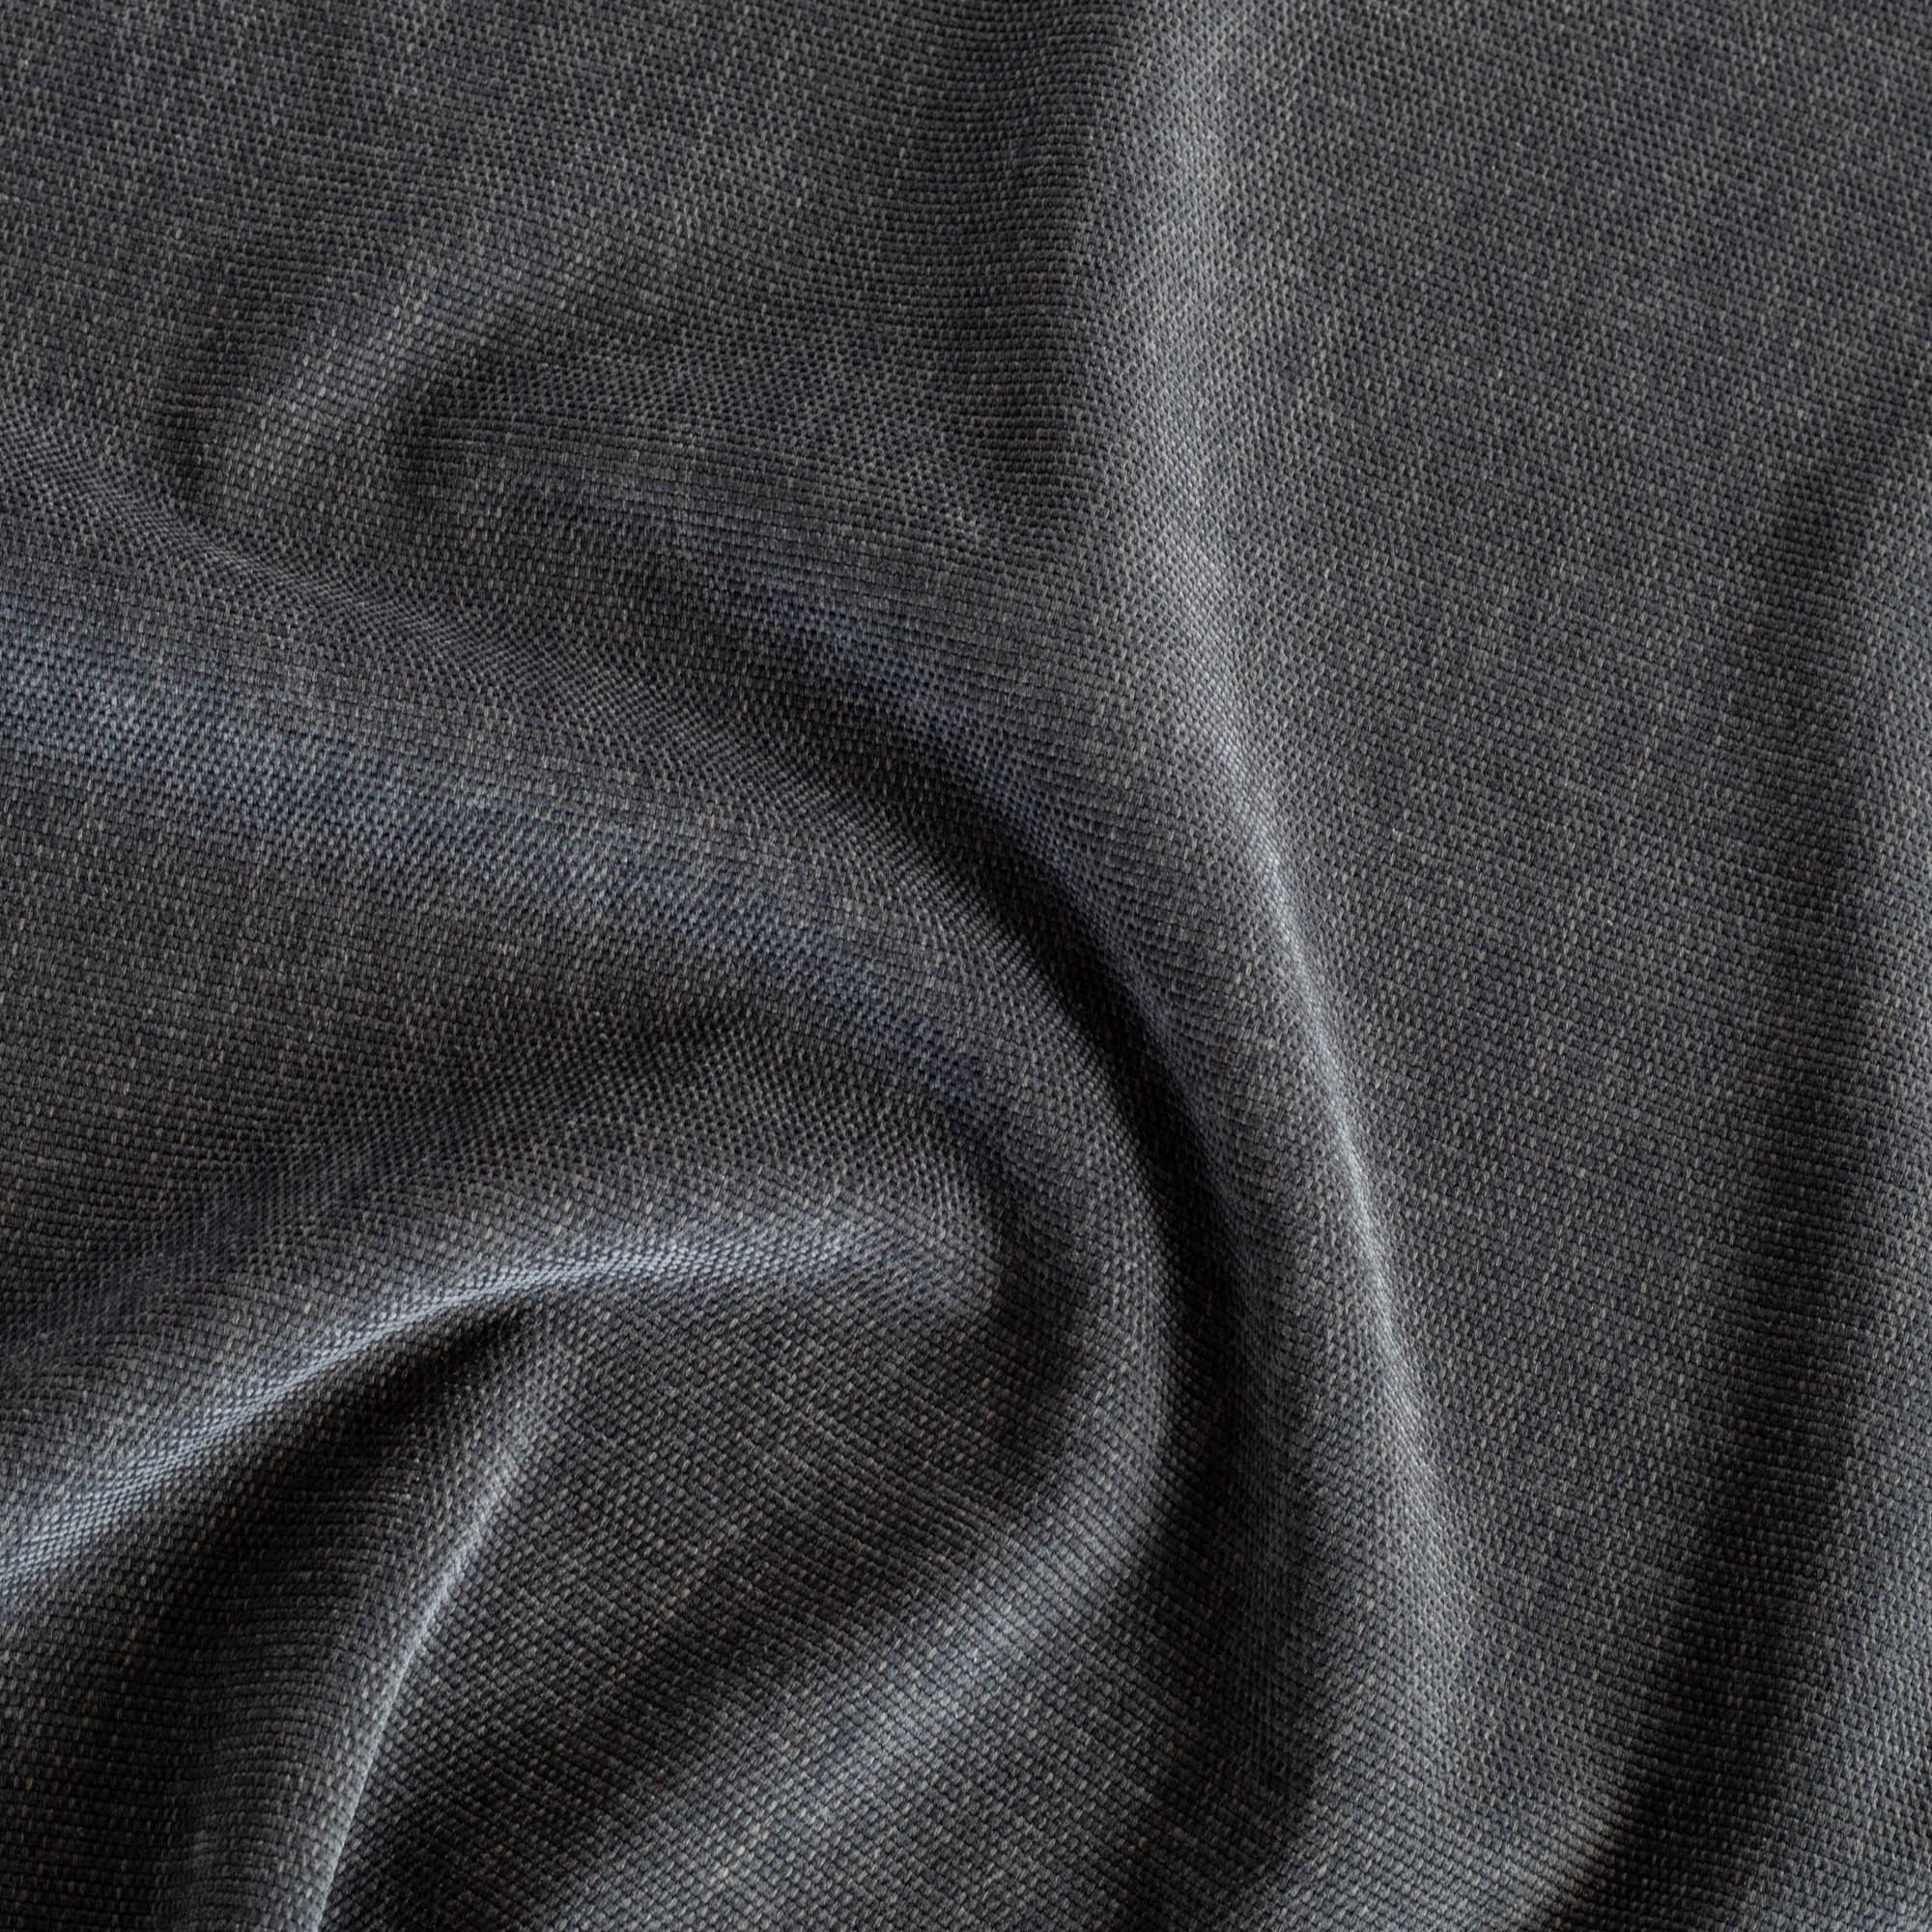 Remy Blue Smoke, a dark gray chenille textured high performance fabric from Tonic Living